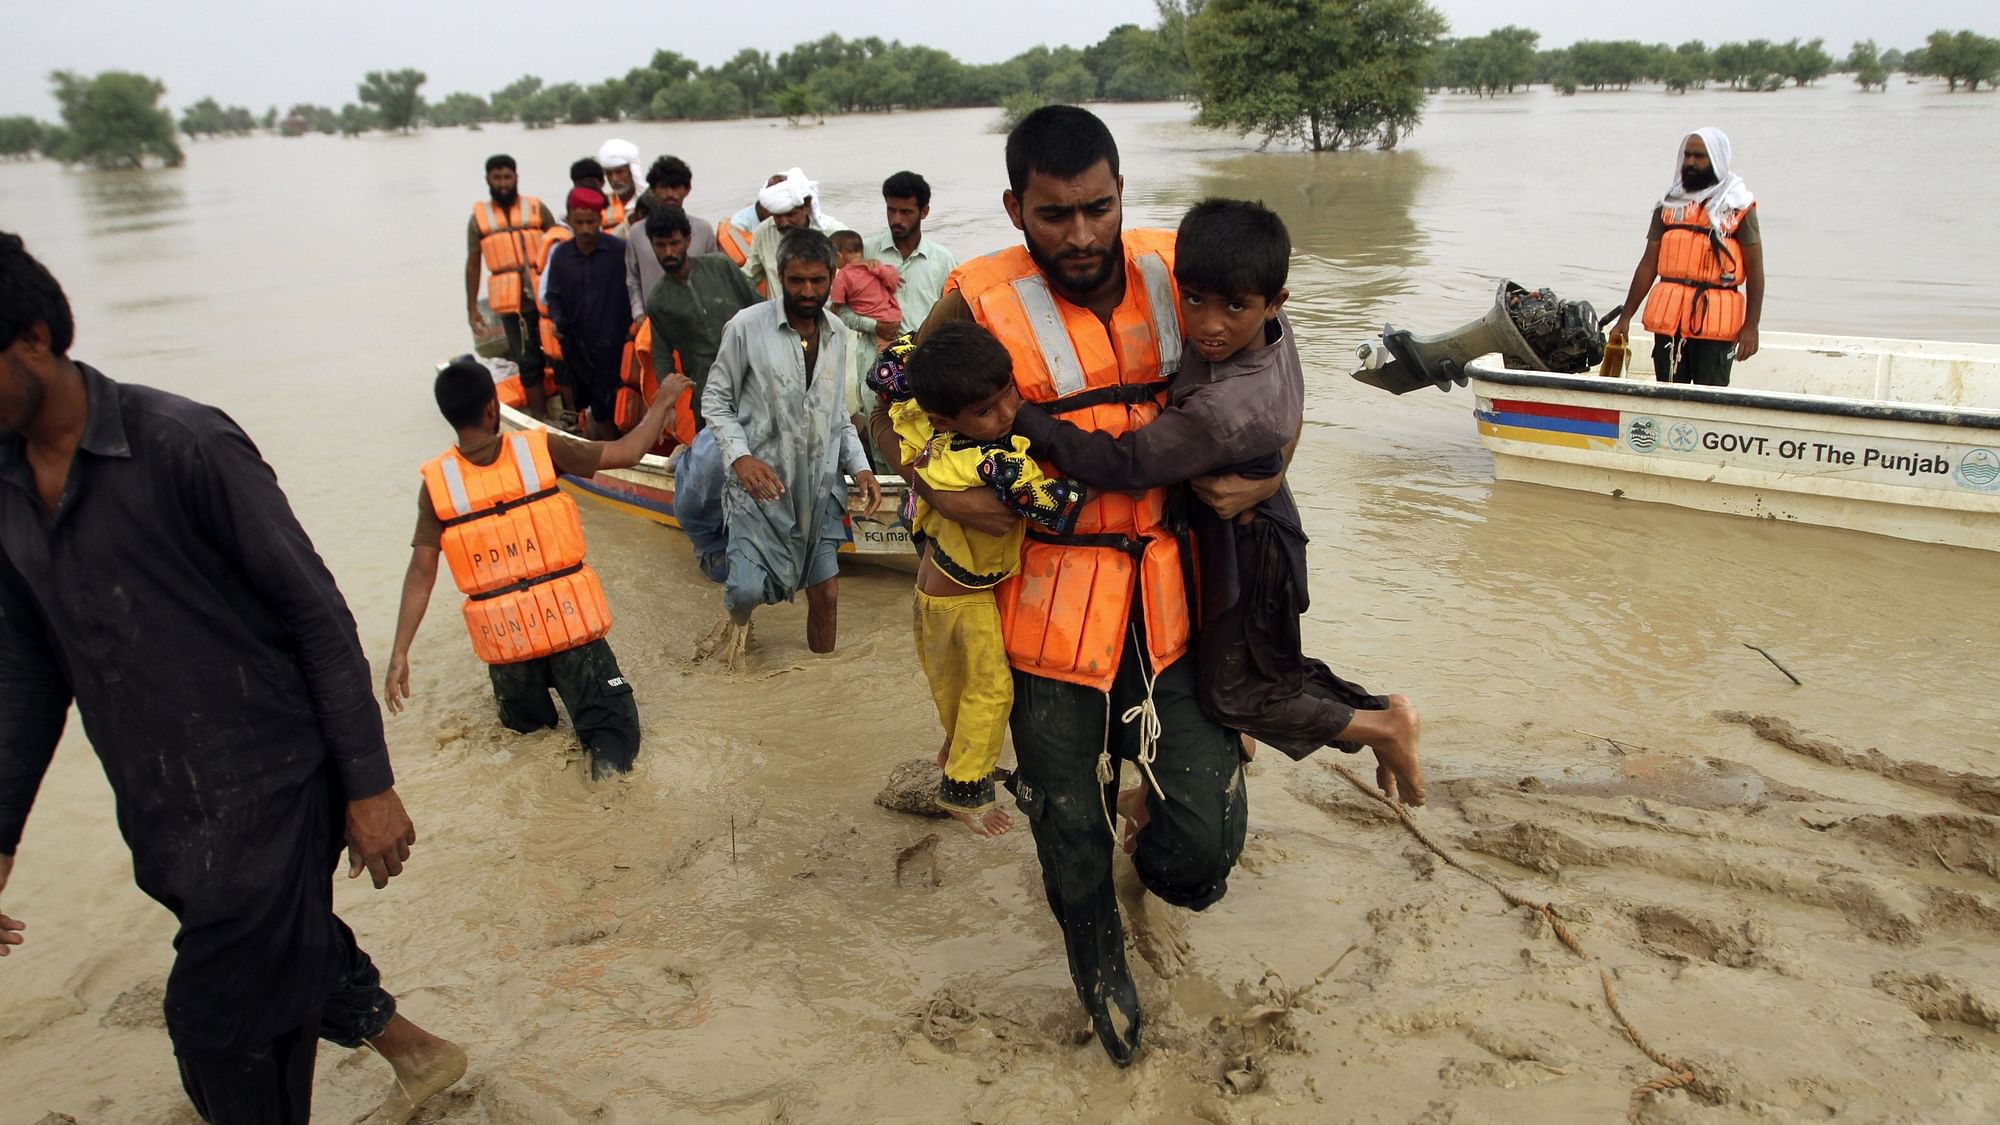 <div class="paragraphs"><p>Devastating <a href="https://www.thequint.com/topic/pakistan-floods">floods</a> in <a href="https://www.thequint.com/topic/pakistan">Pakistan</a> have killed over a thousand people and wreaked damage to property, and natural life. Pakistan's Climate Change Minister Sherry Rehman called it the "monster monsoon of the decade."</p></div>